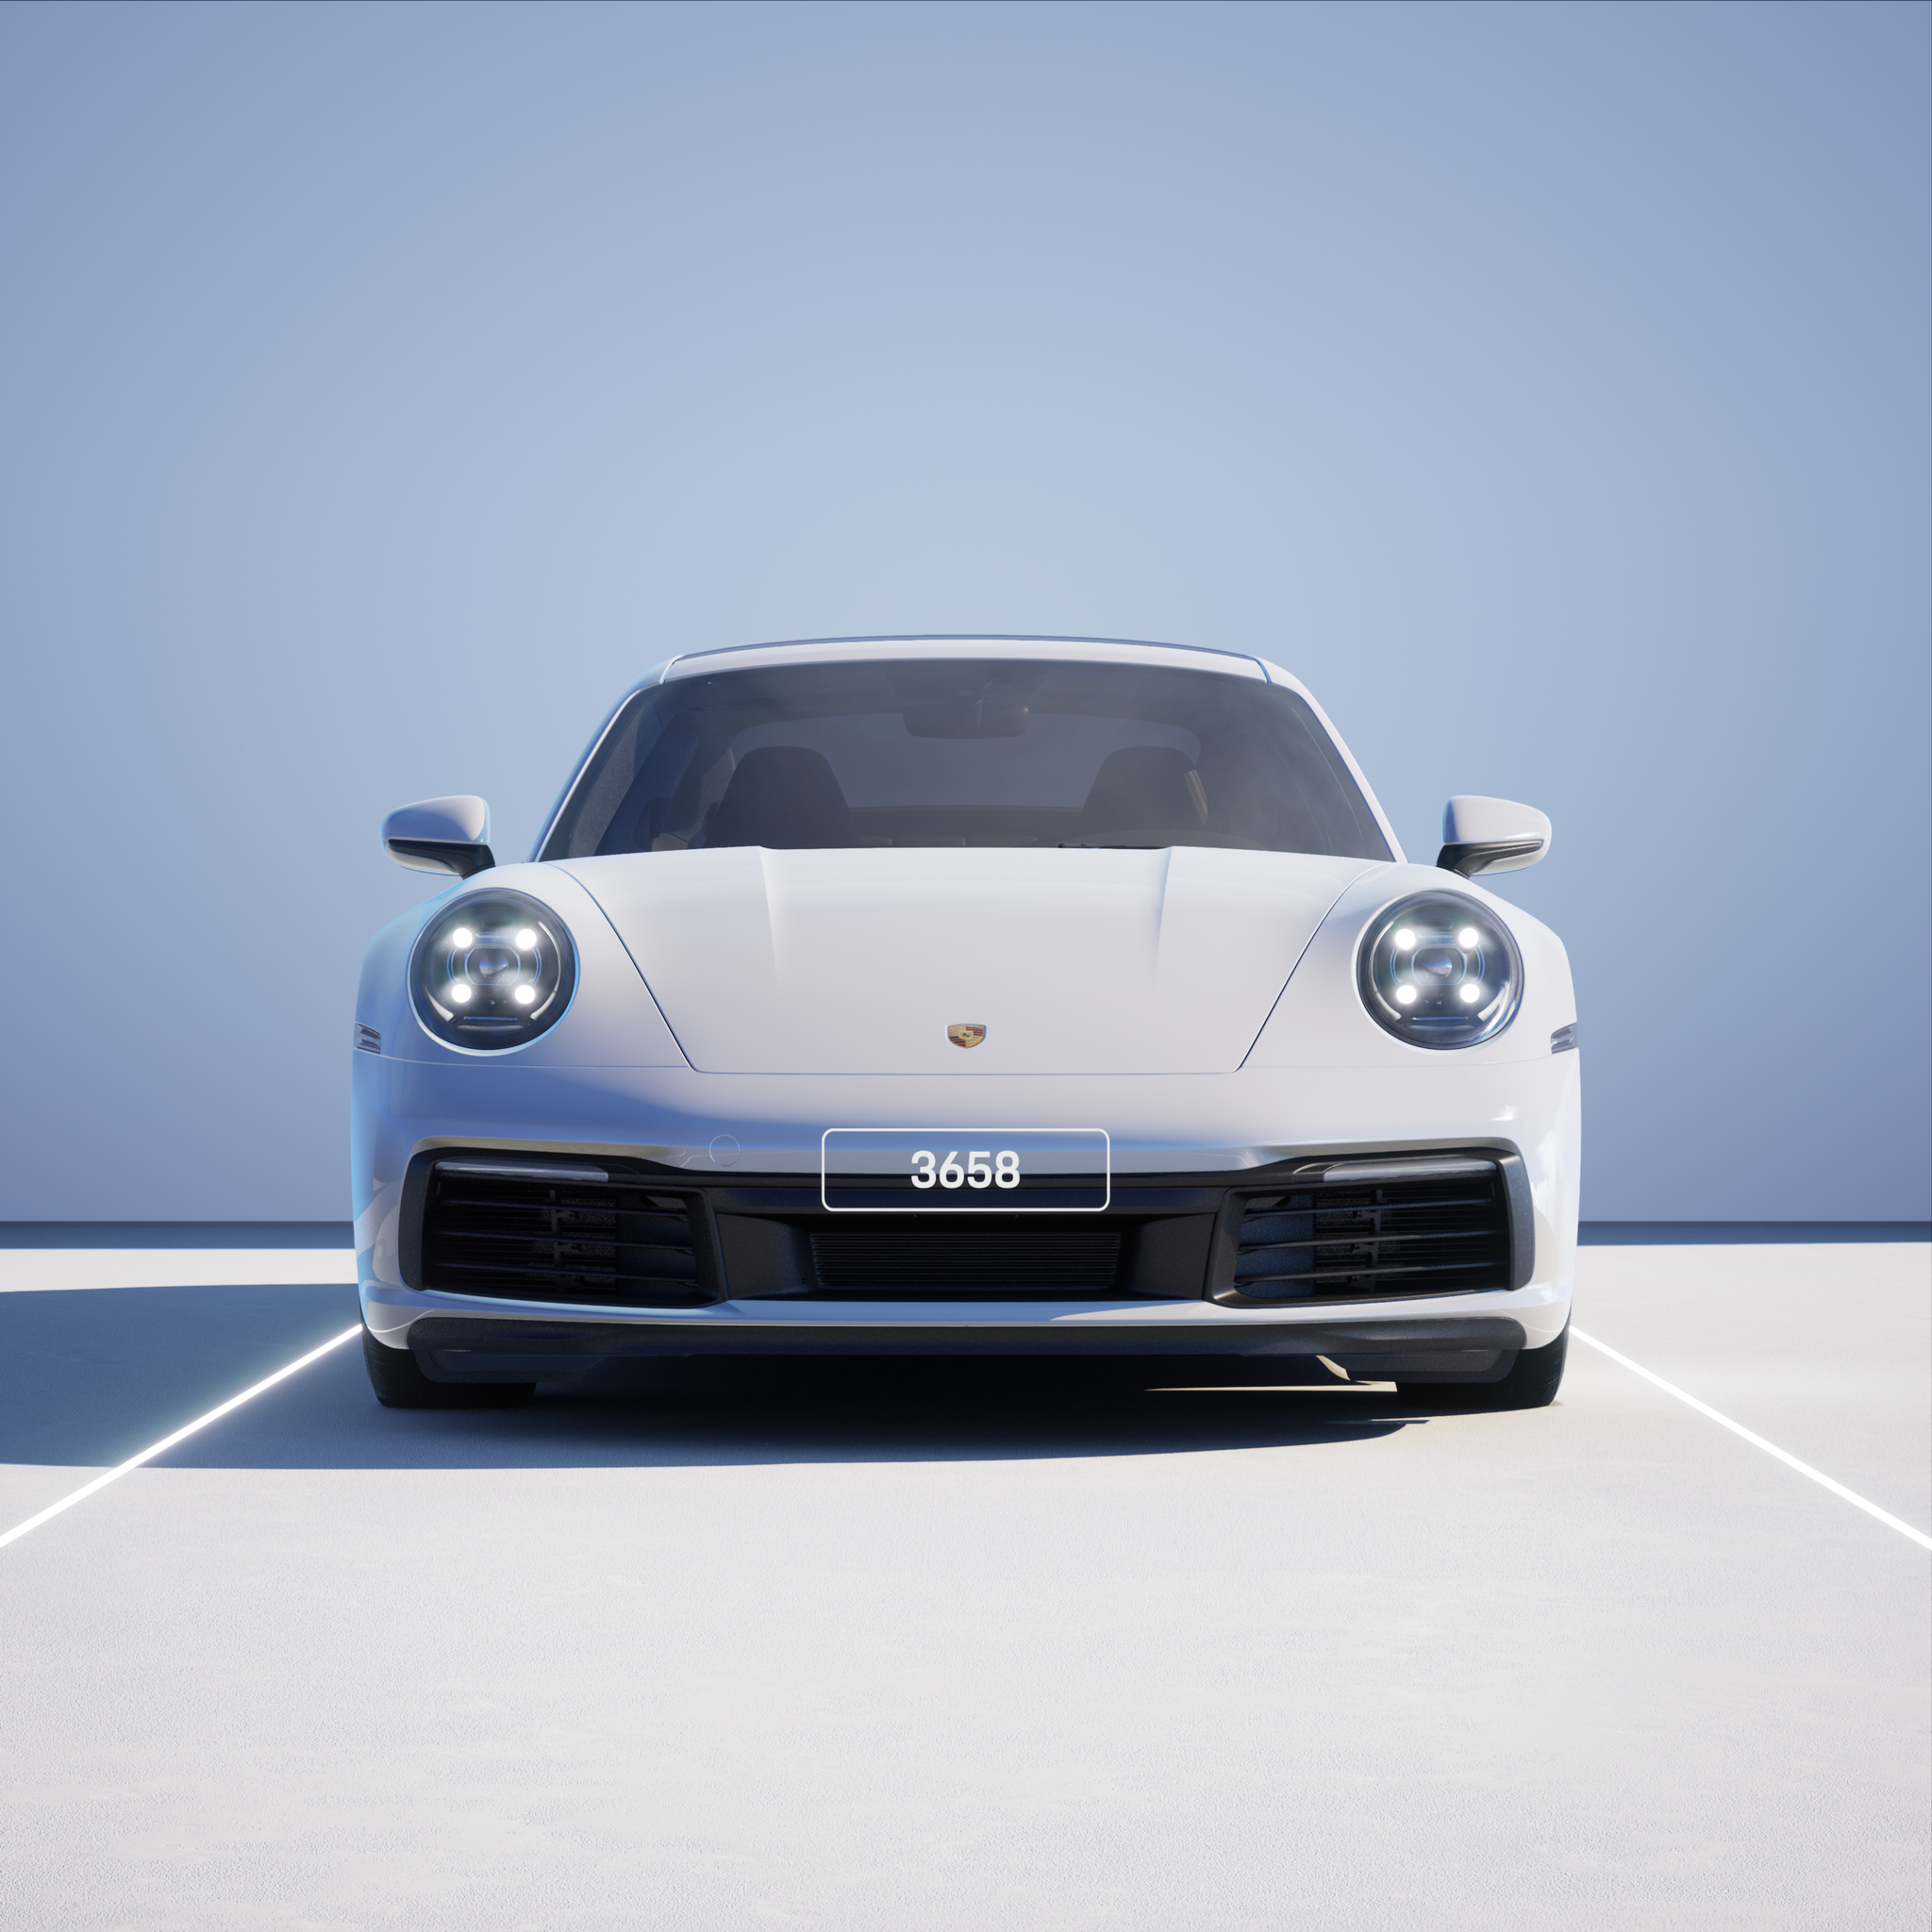 The PORSCHΞ 911 3658 image in phase